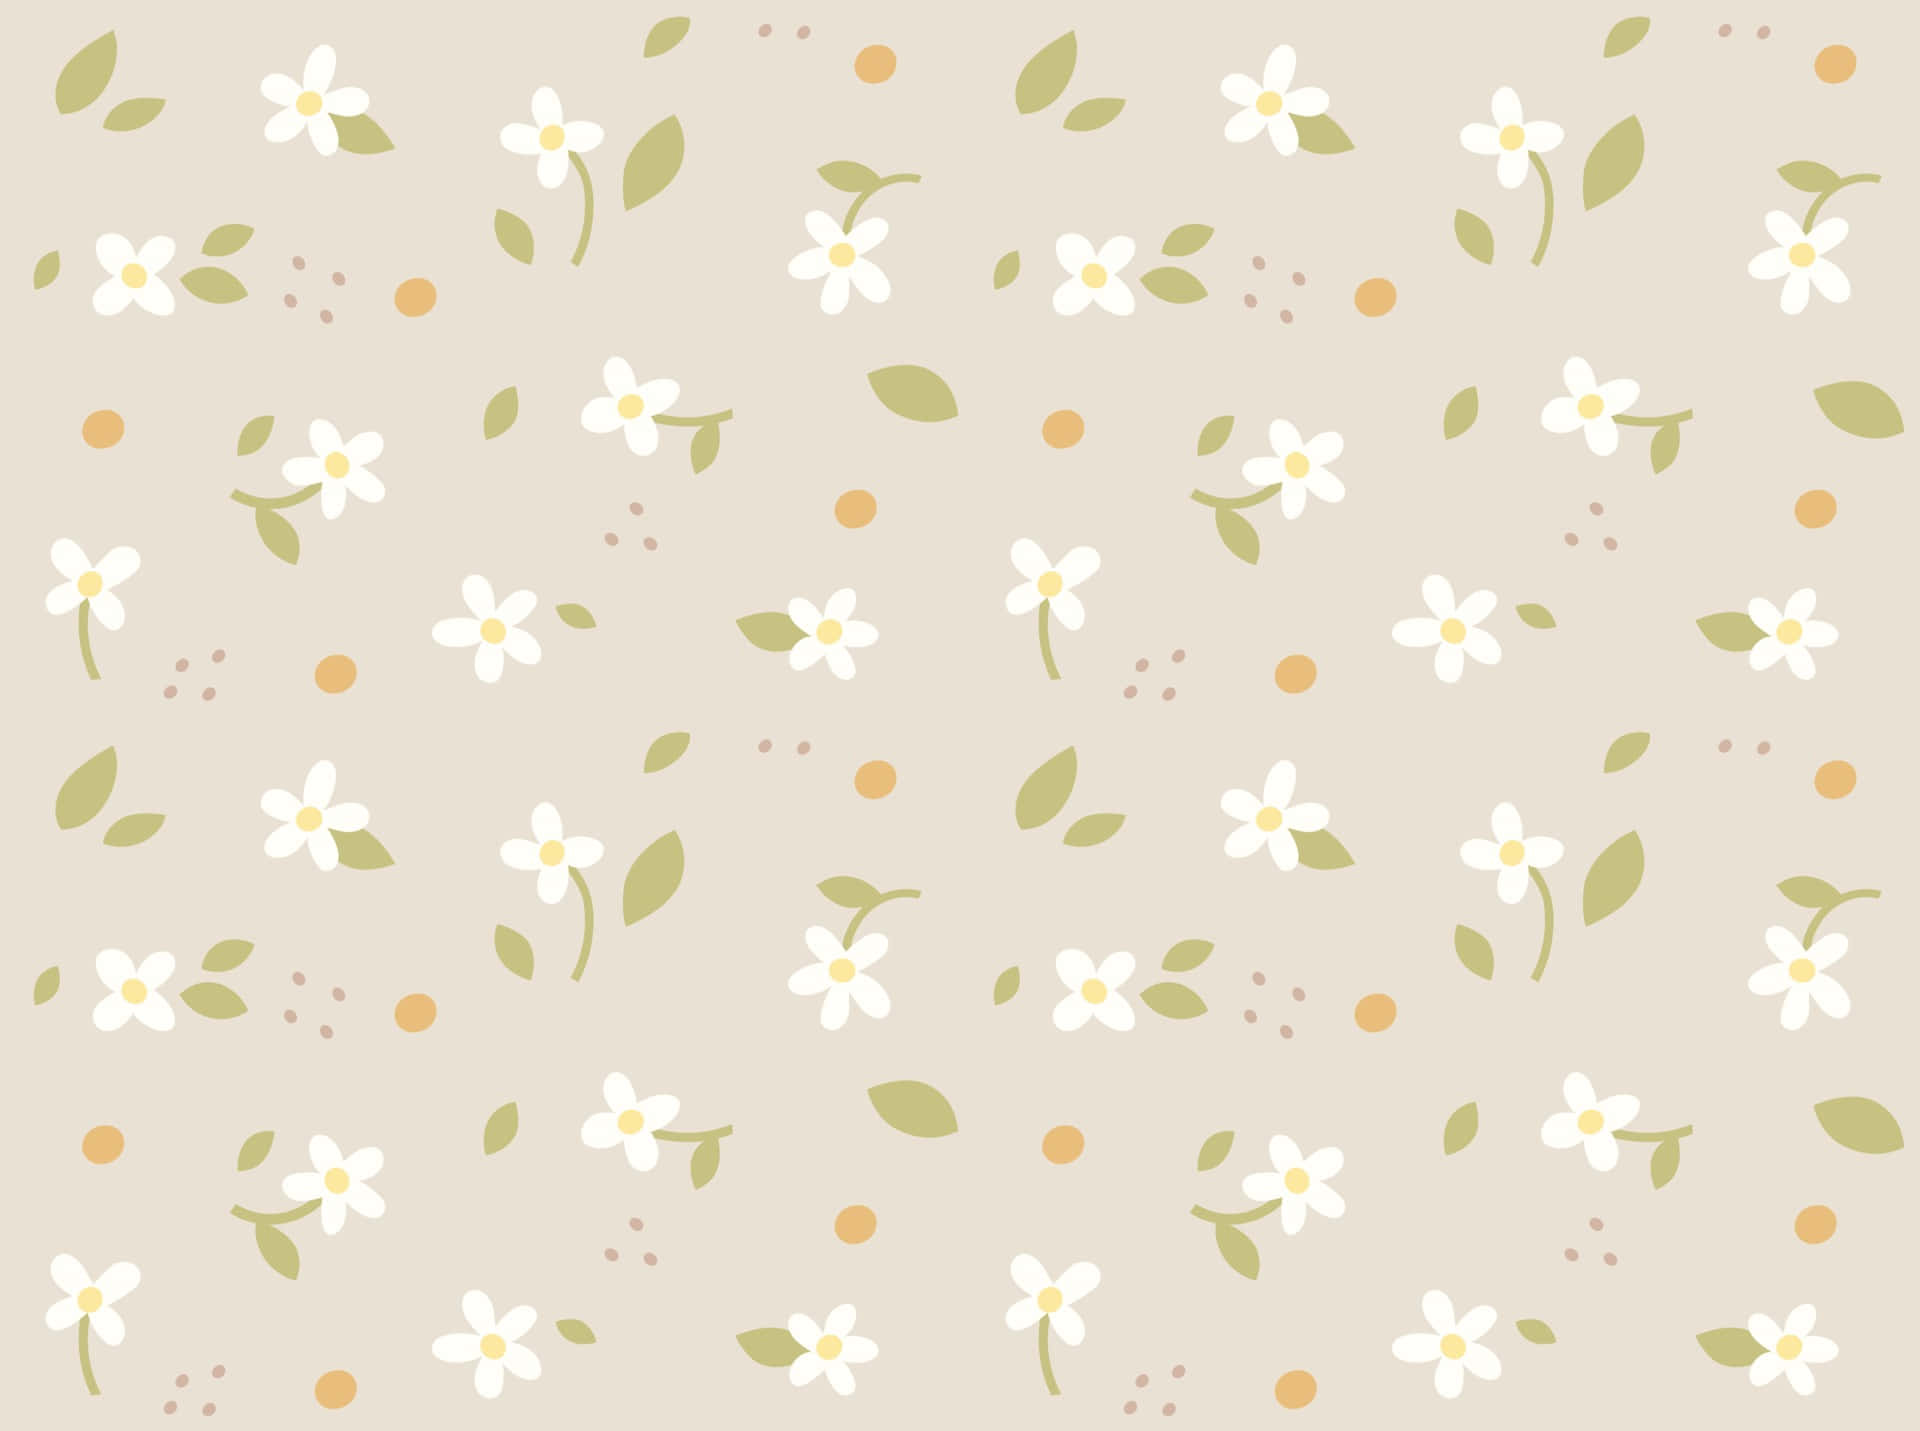 A White And Yellow Floral Pattern On A Beige Background